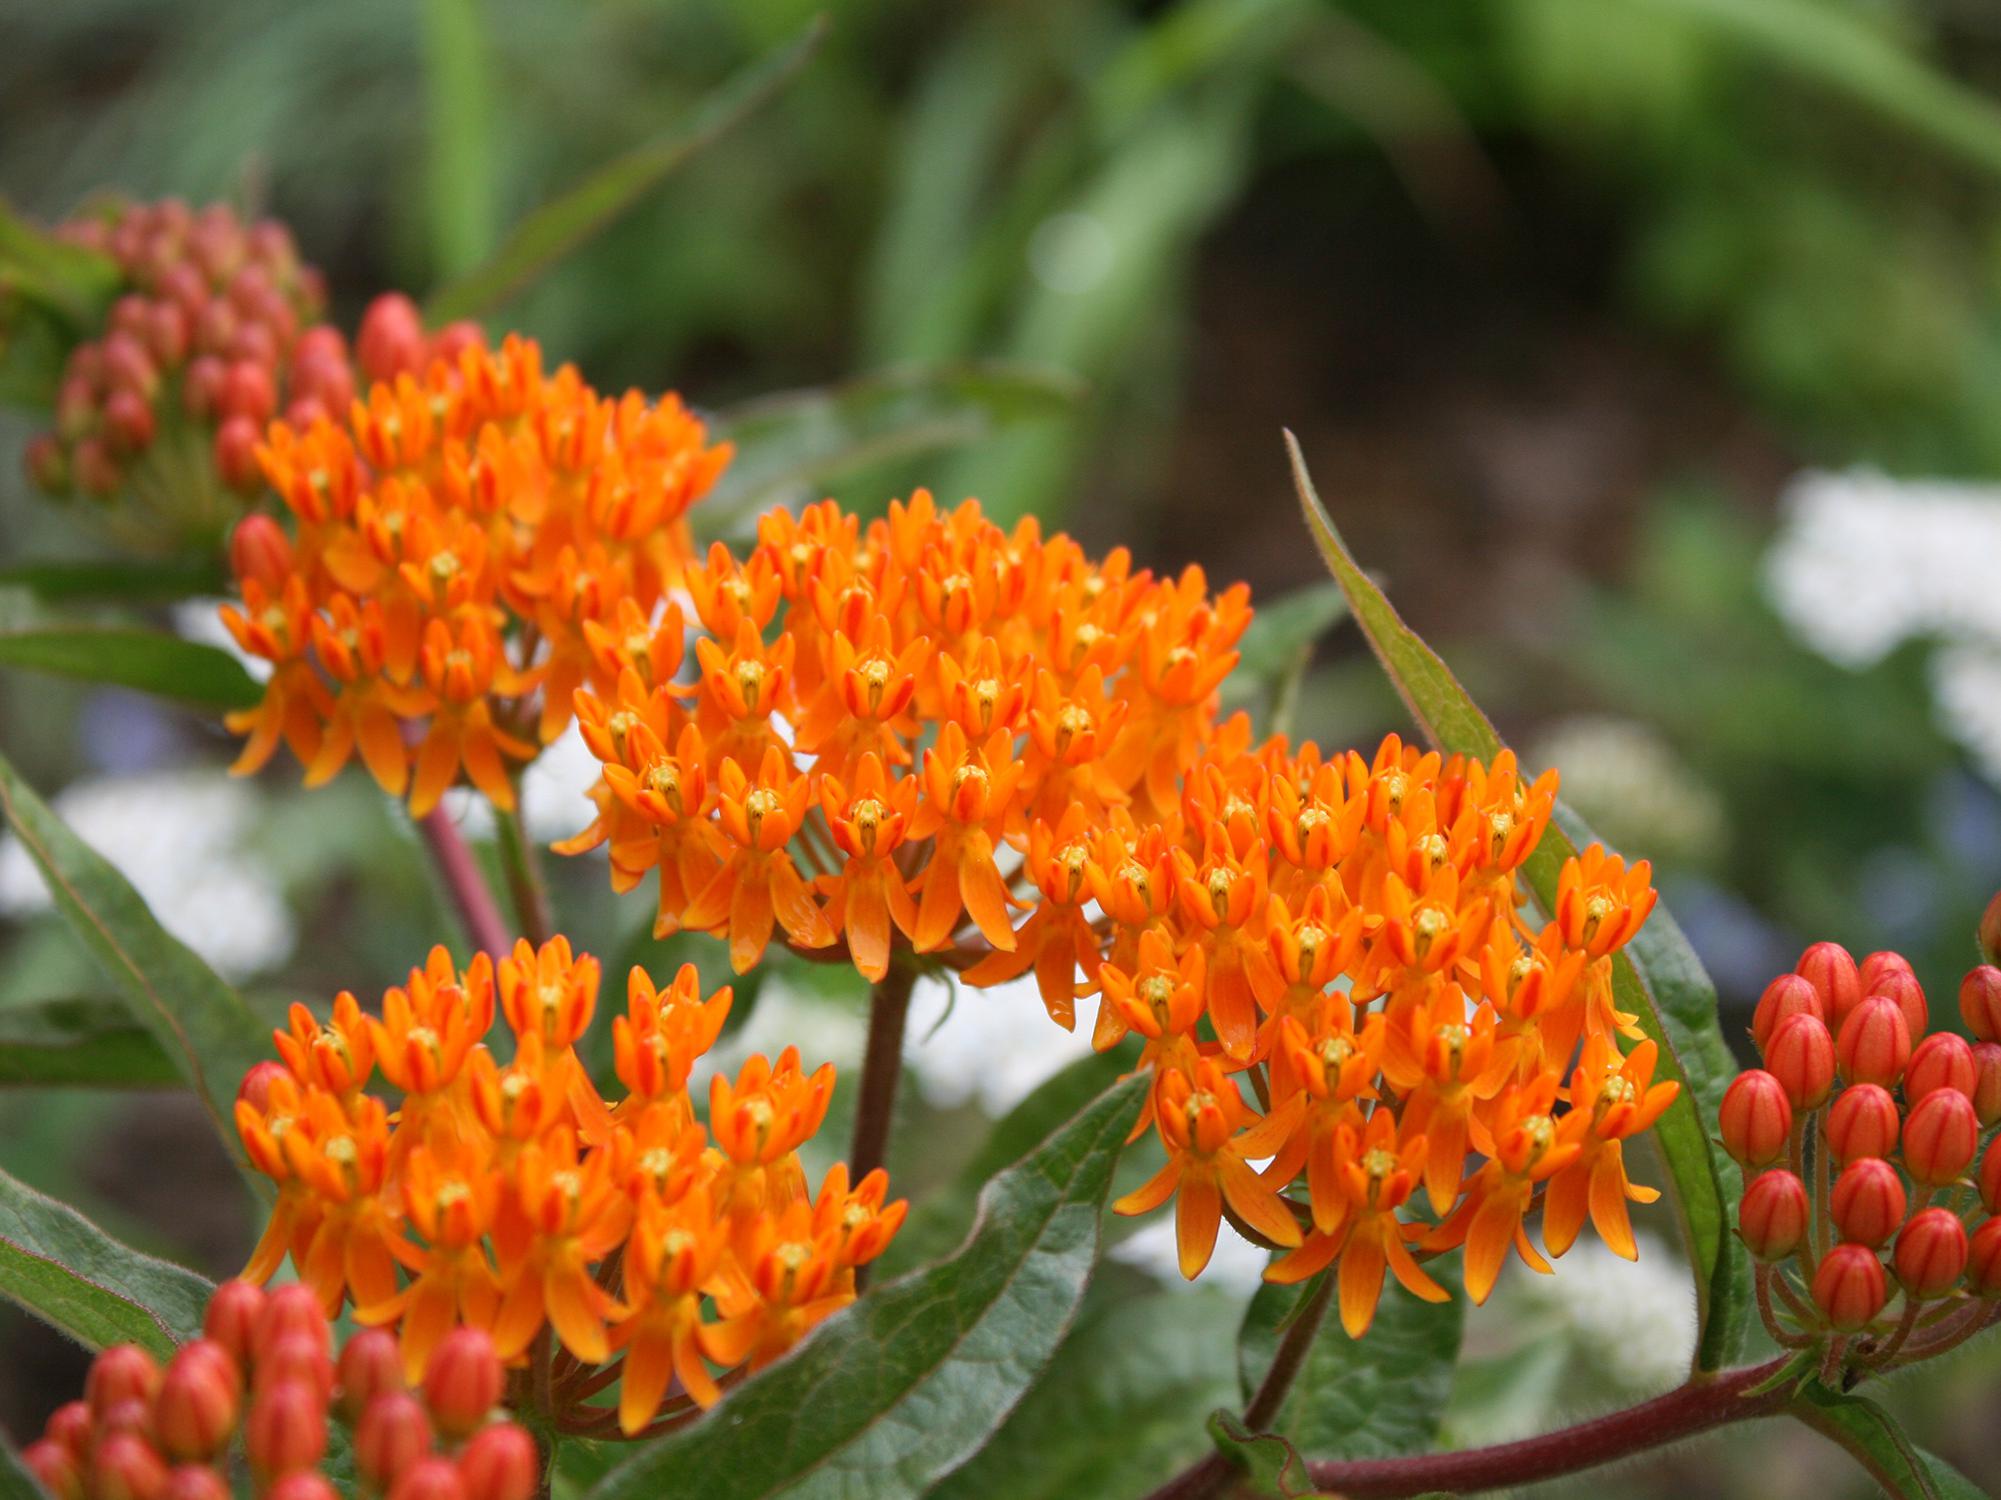 Small, orange flower petals cluster together on top of stems and leaves.